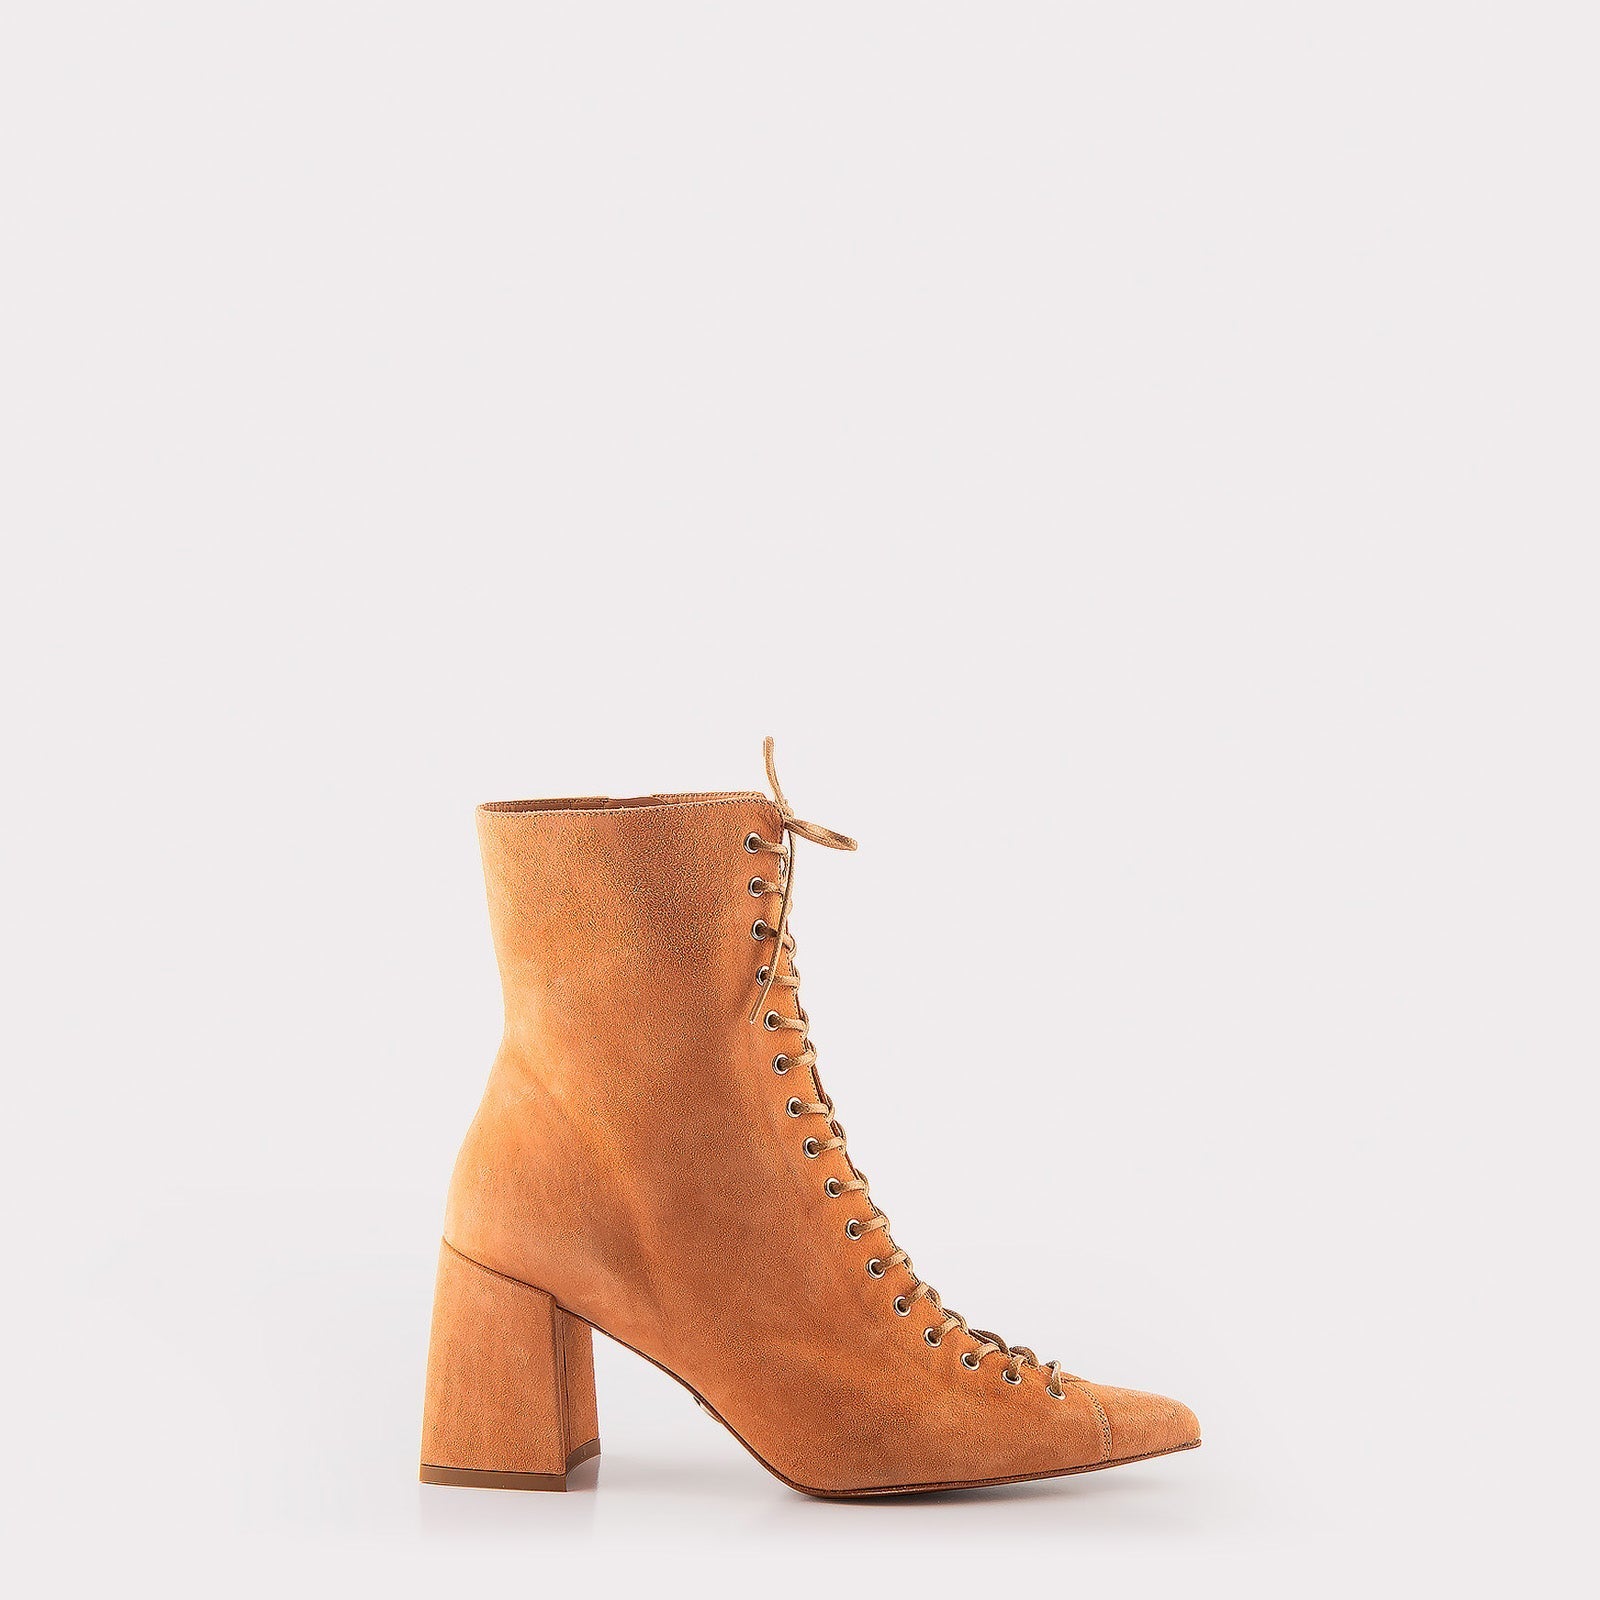 JOLIE 01 NUDE SUEDE LEATHER ANKLE BOOTS